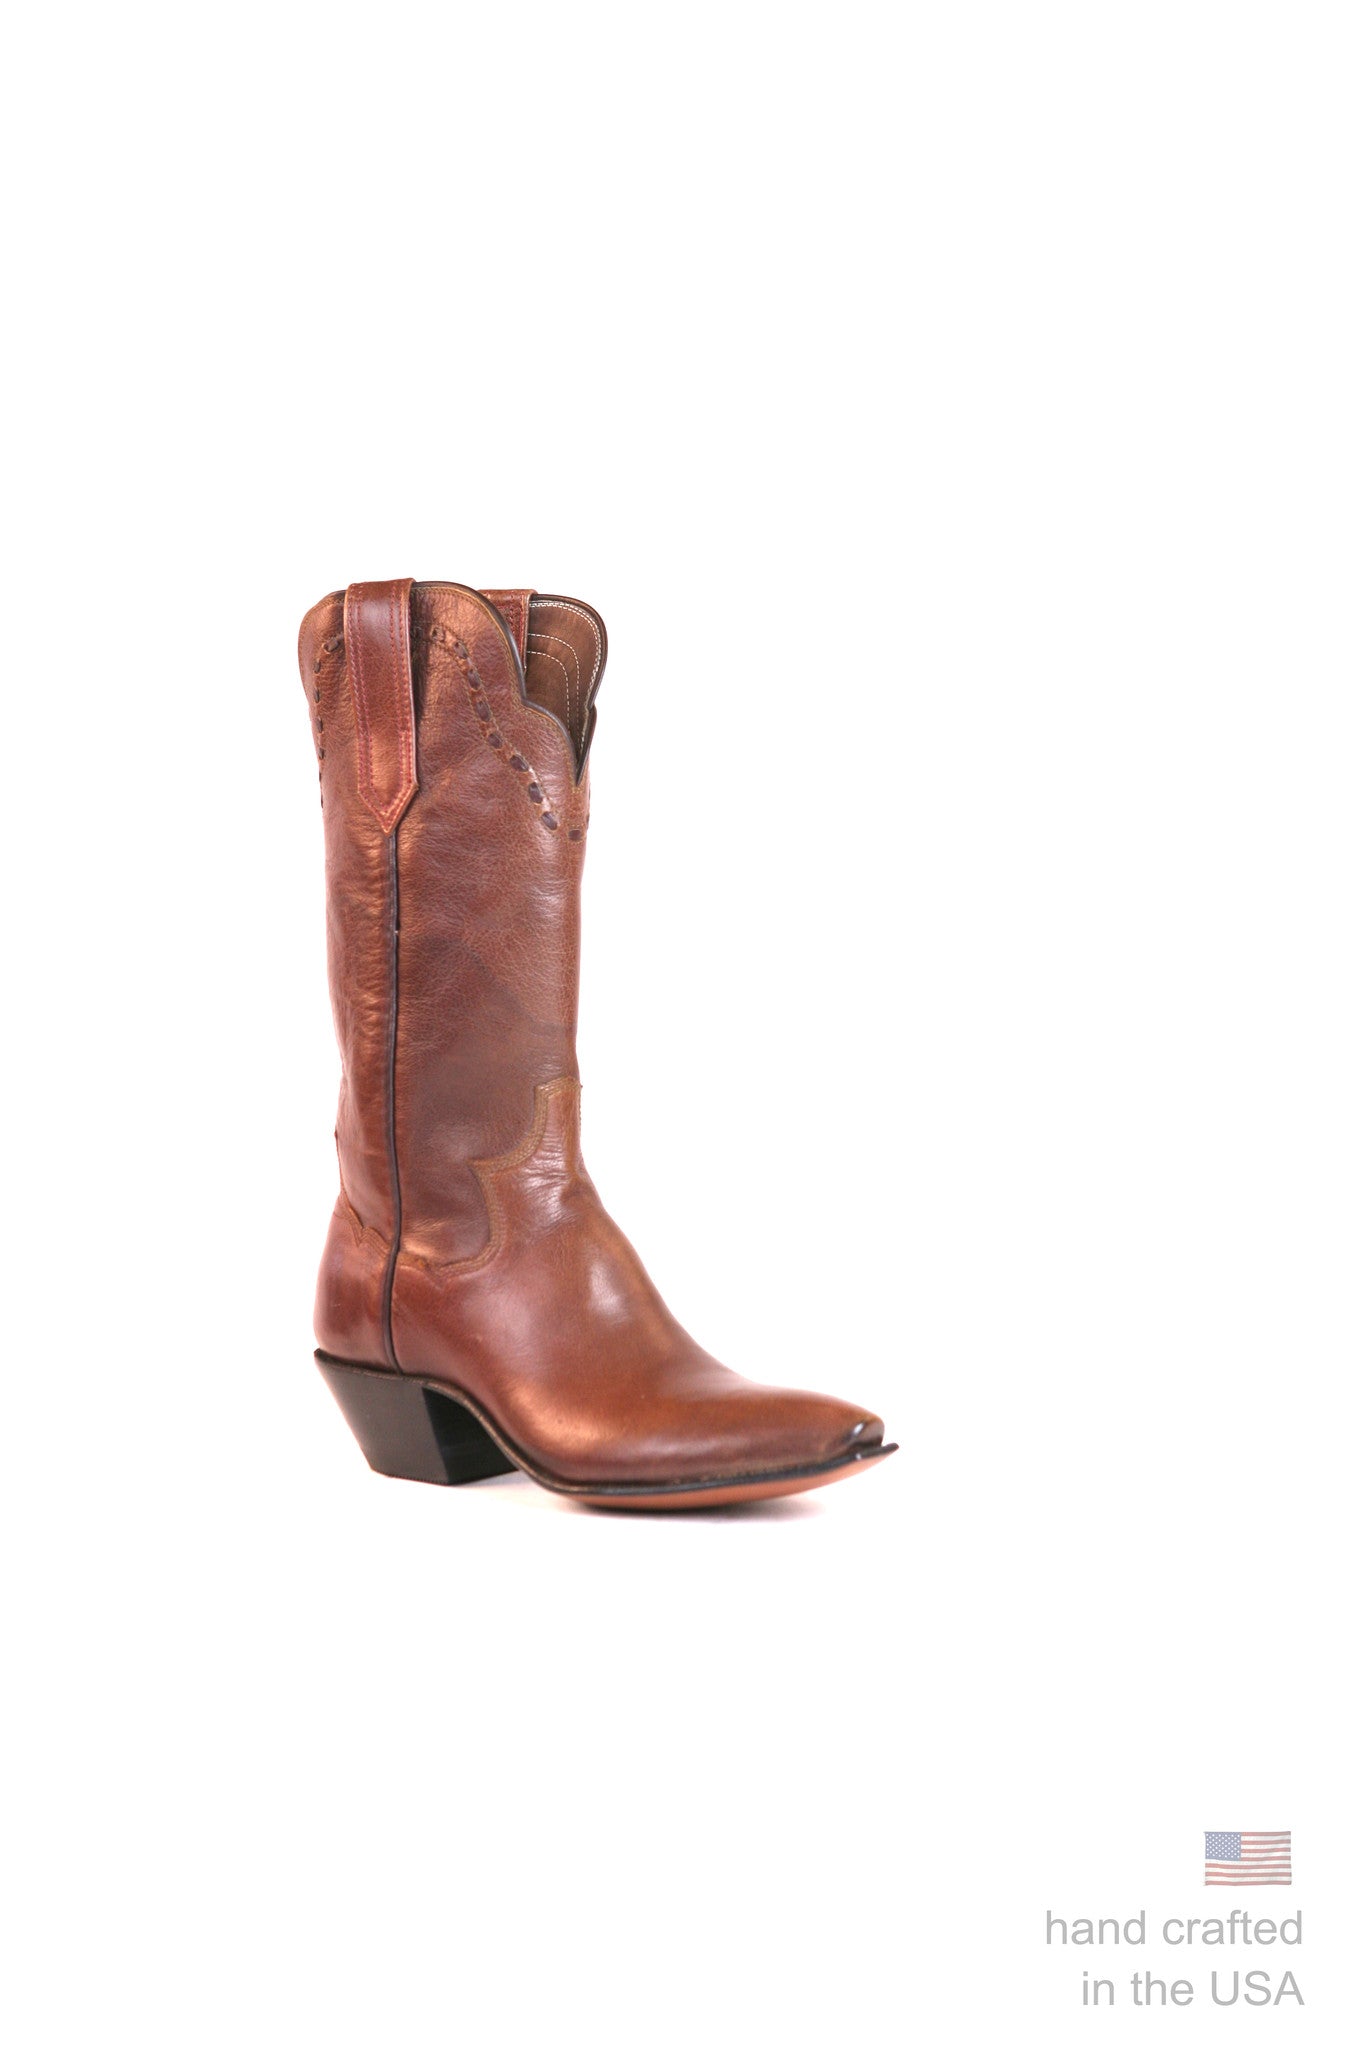 Singles: Boot 0017: Size 5A